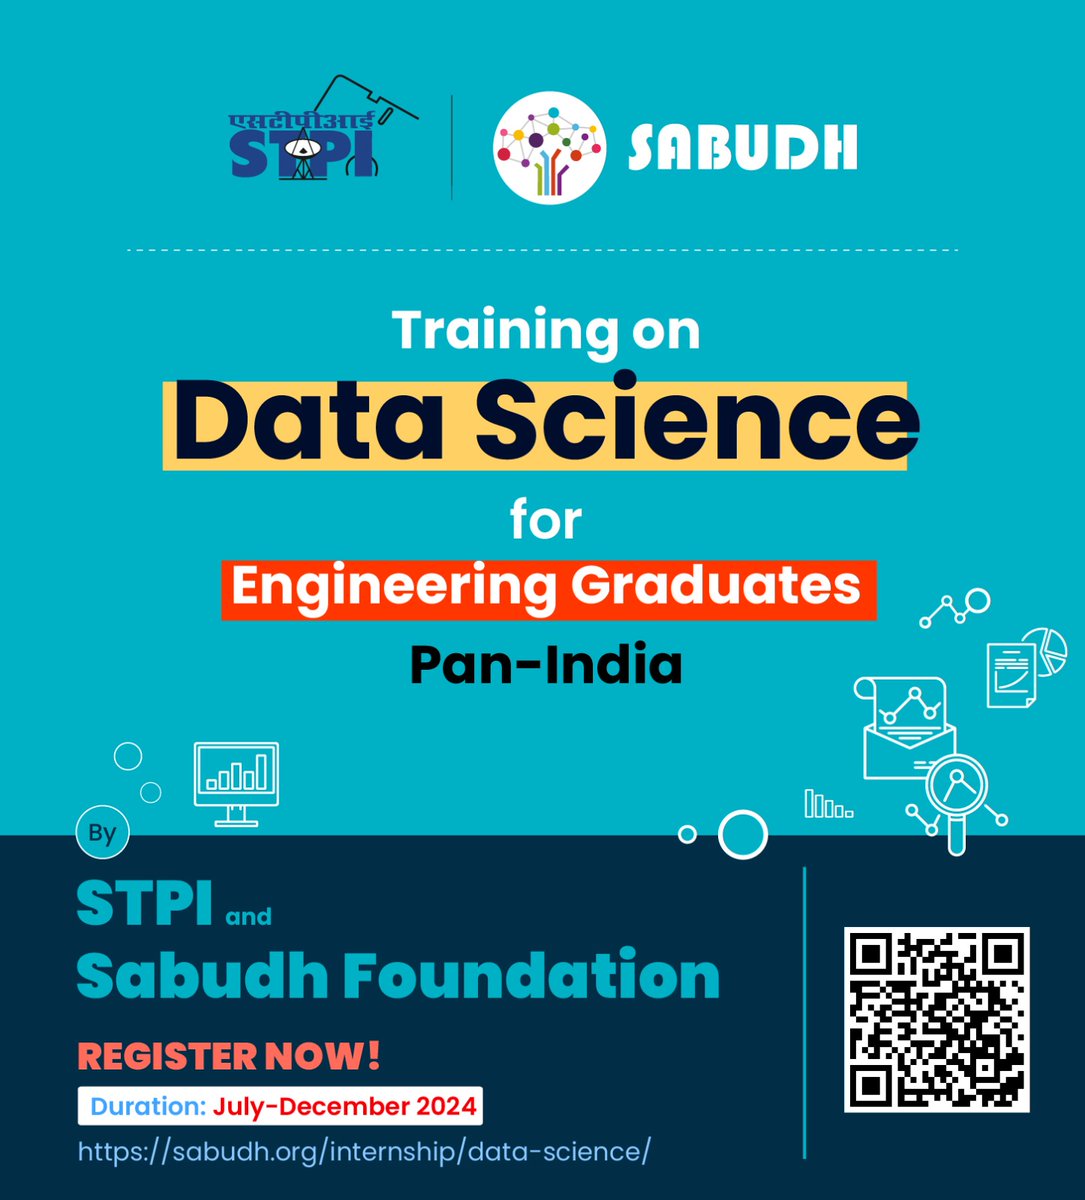 STPI and Sabudh Foundation have joined hands together to provide a cost-free, six-month quality training in Data Science for around 200 Engineering graduates across India. Enroll now: sabudh.org/internship/dat… Duration: July-December 2024 @SabudhF